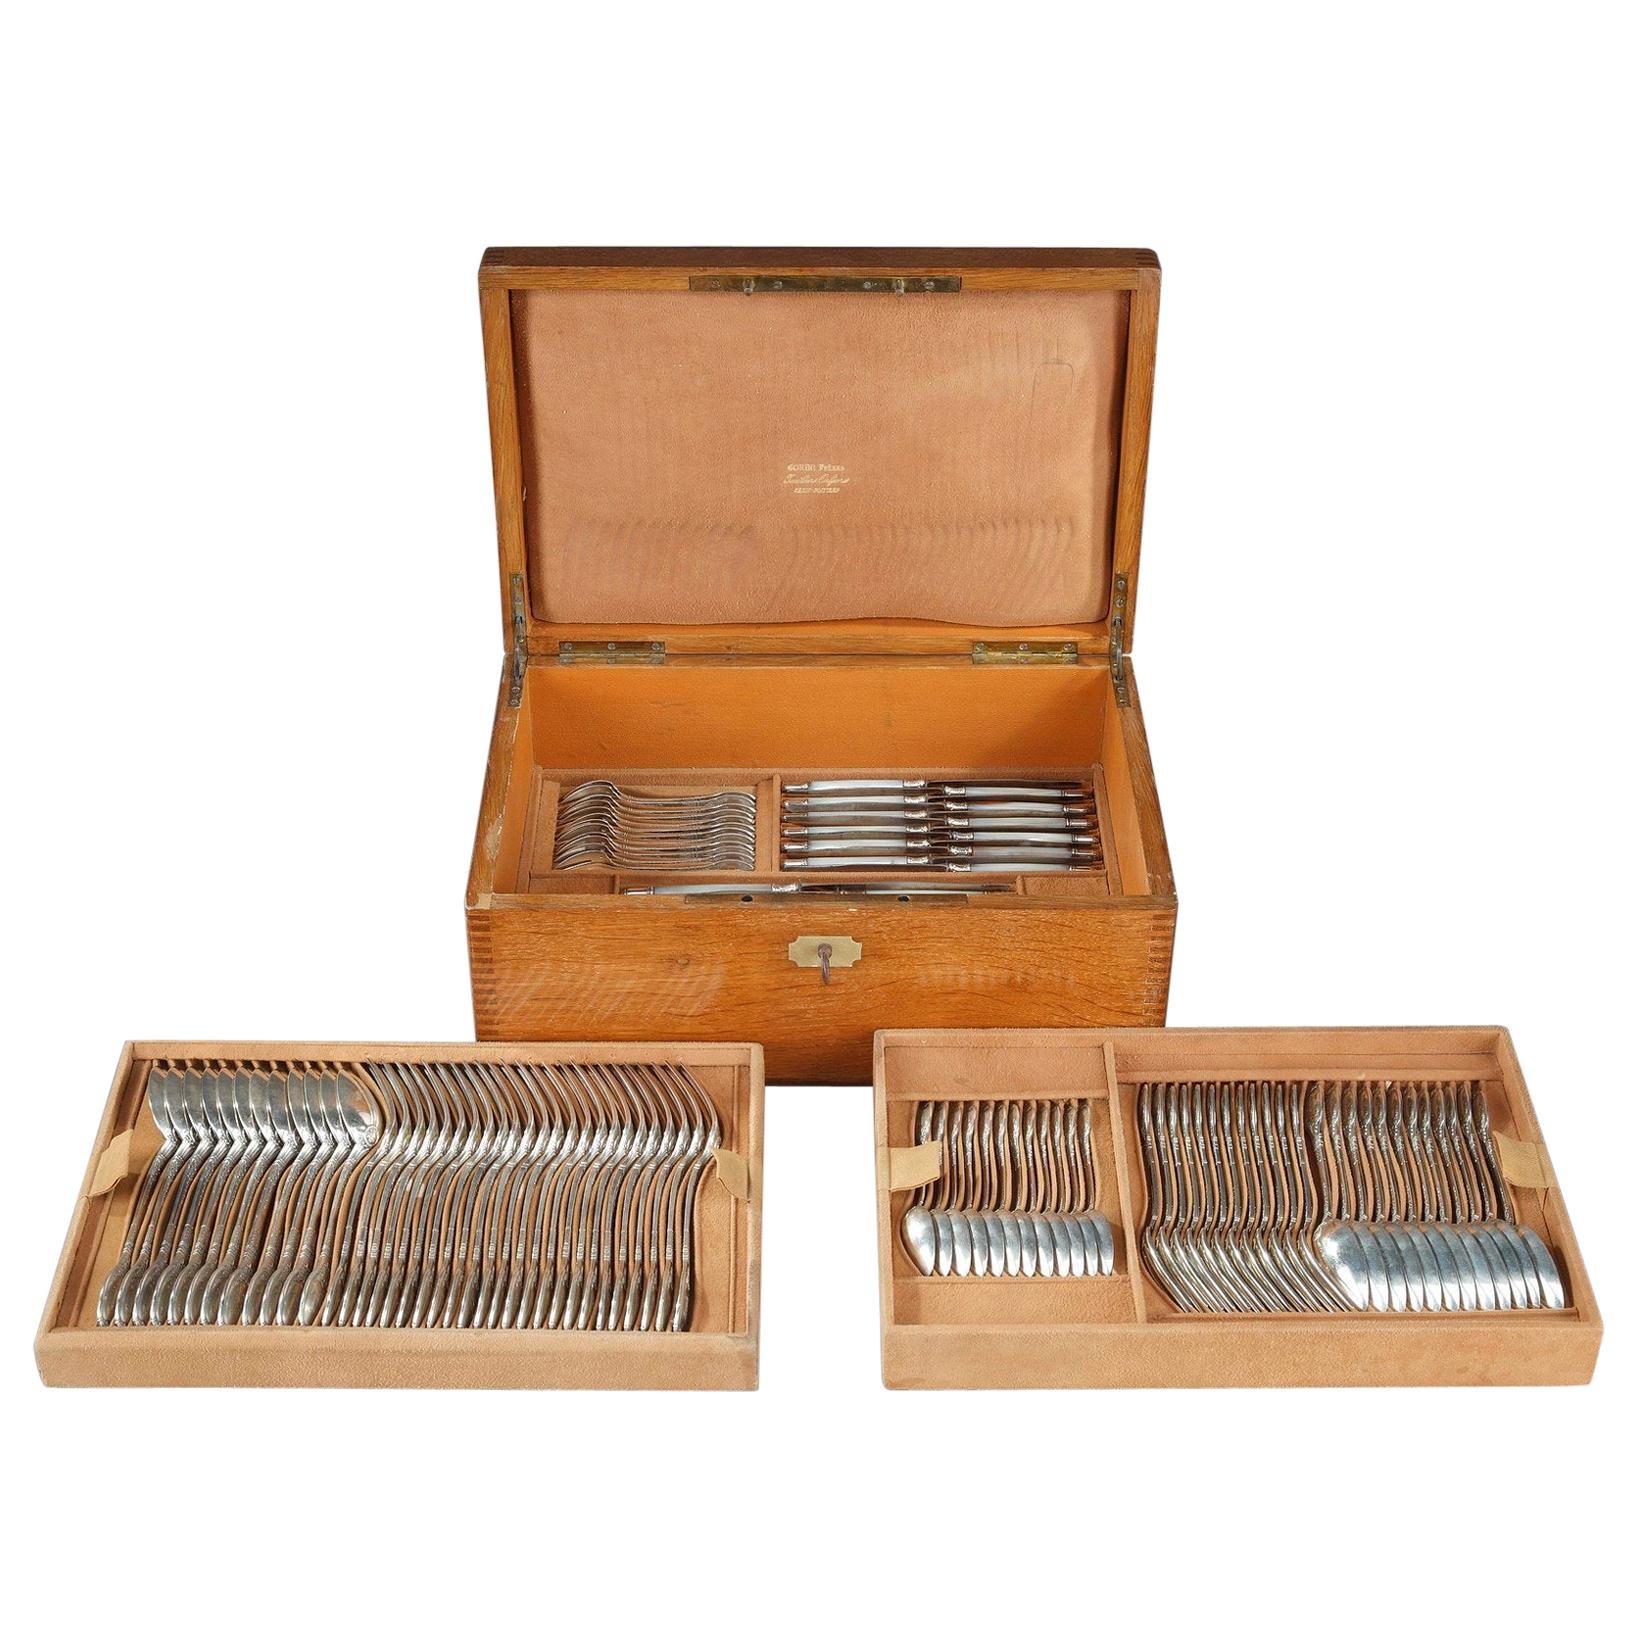 Sterling Silver Flatware by Lappara & Gabriel in a case by Gorini Frères